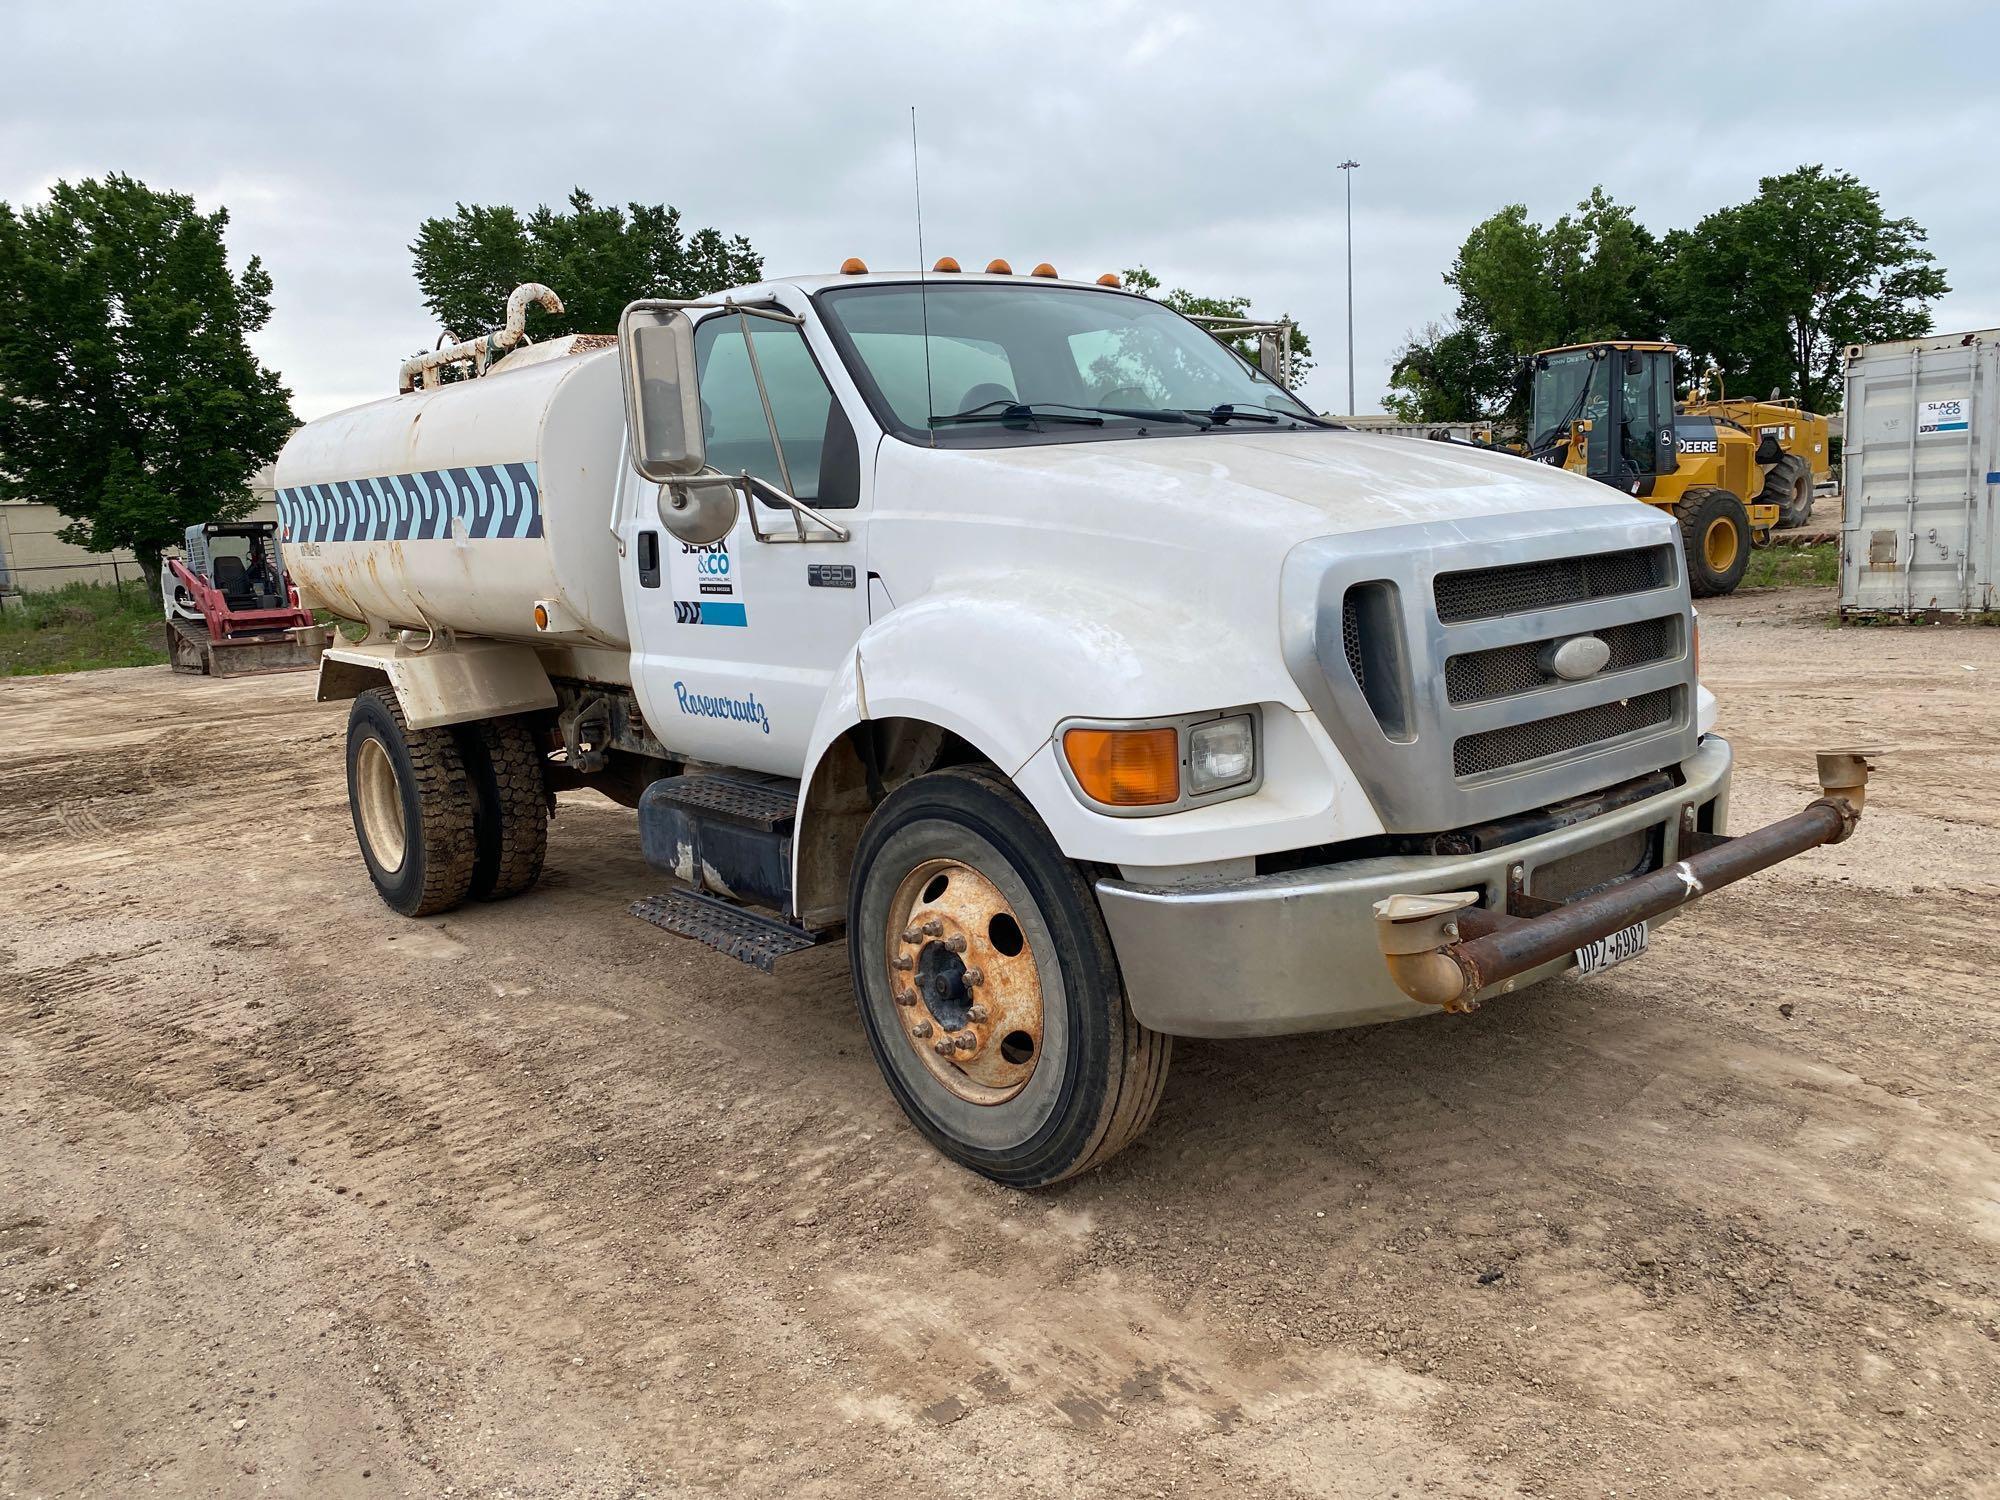 2007 FORD F650 WATER TRUCK VN:509959 powered by diesel engine, equipped with 6 speed transmission,